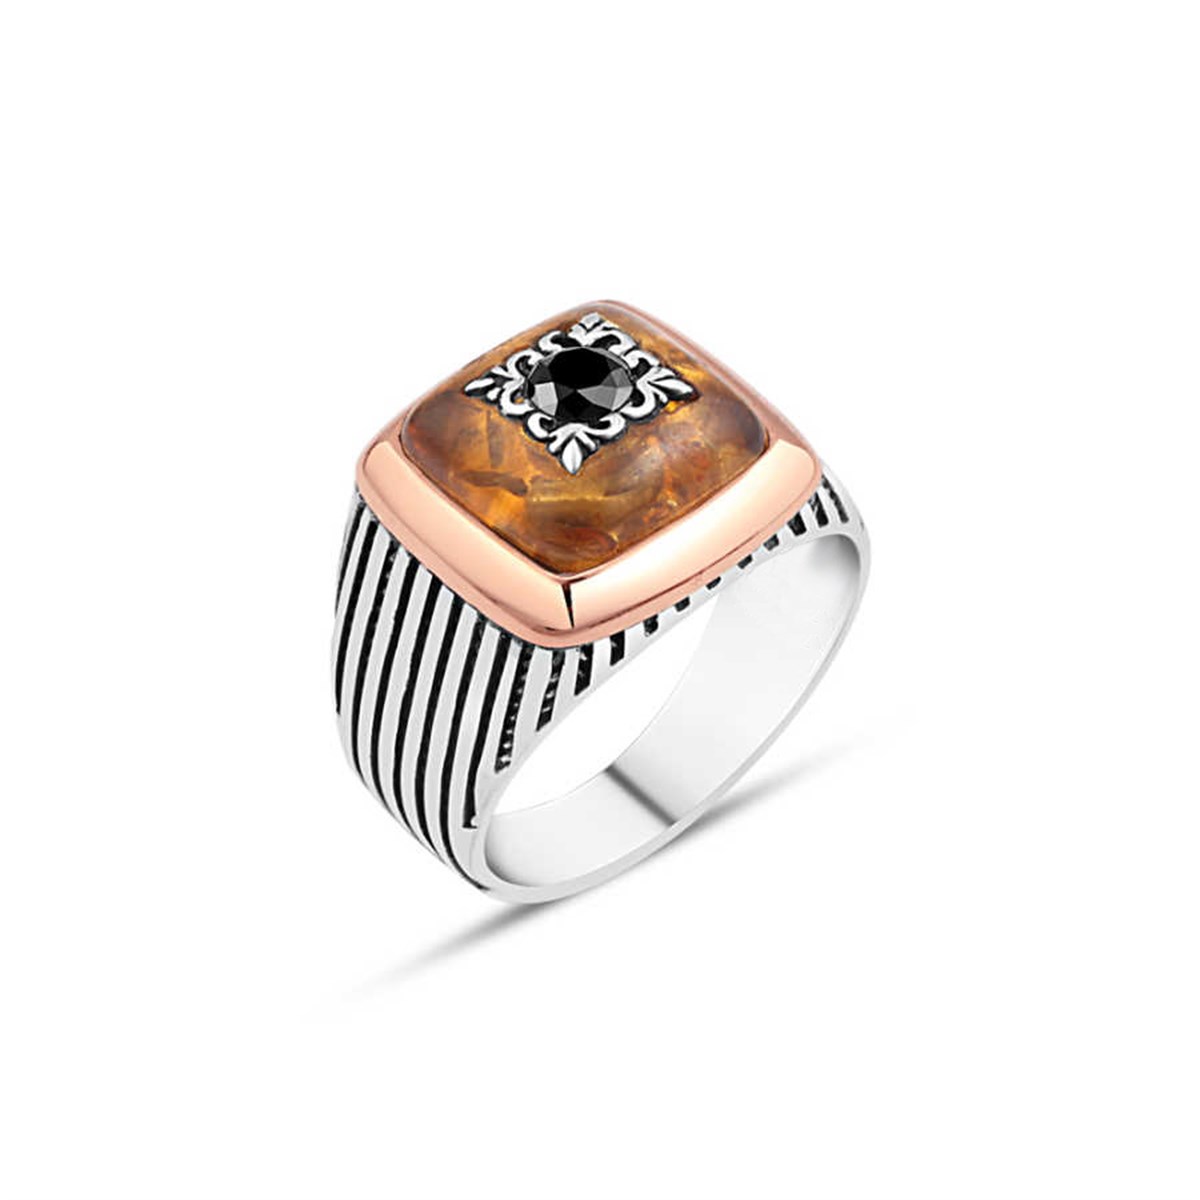 Sterling Silver Men's Ring with Zircon Stone in the Middle on Synthetic Amber